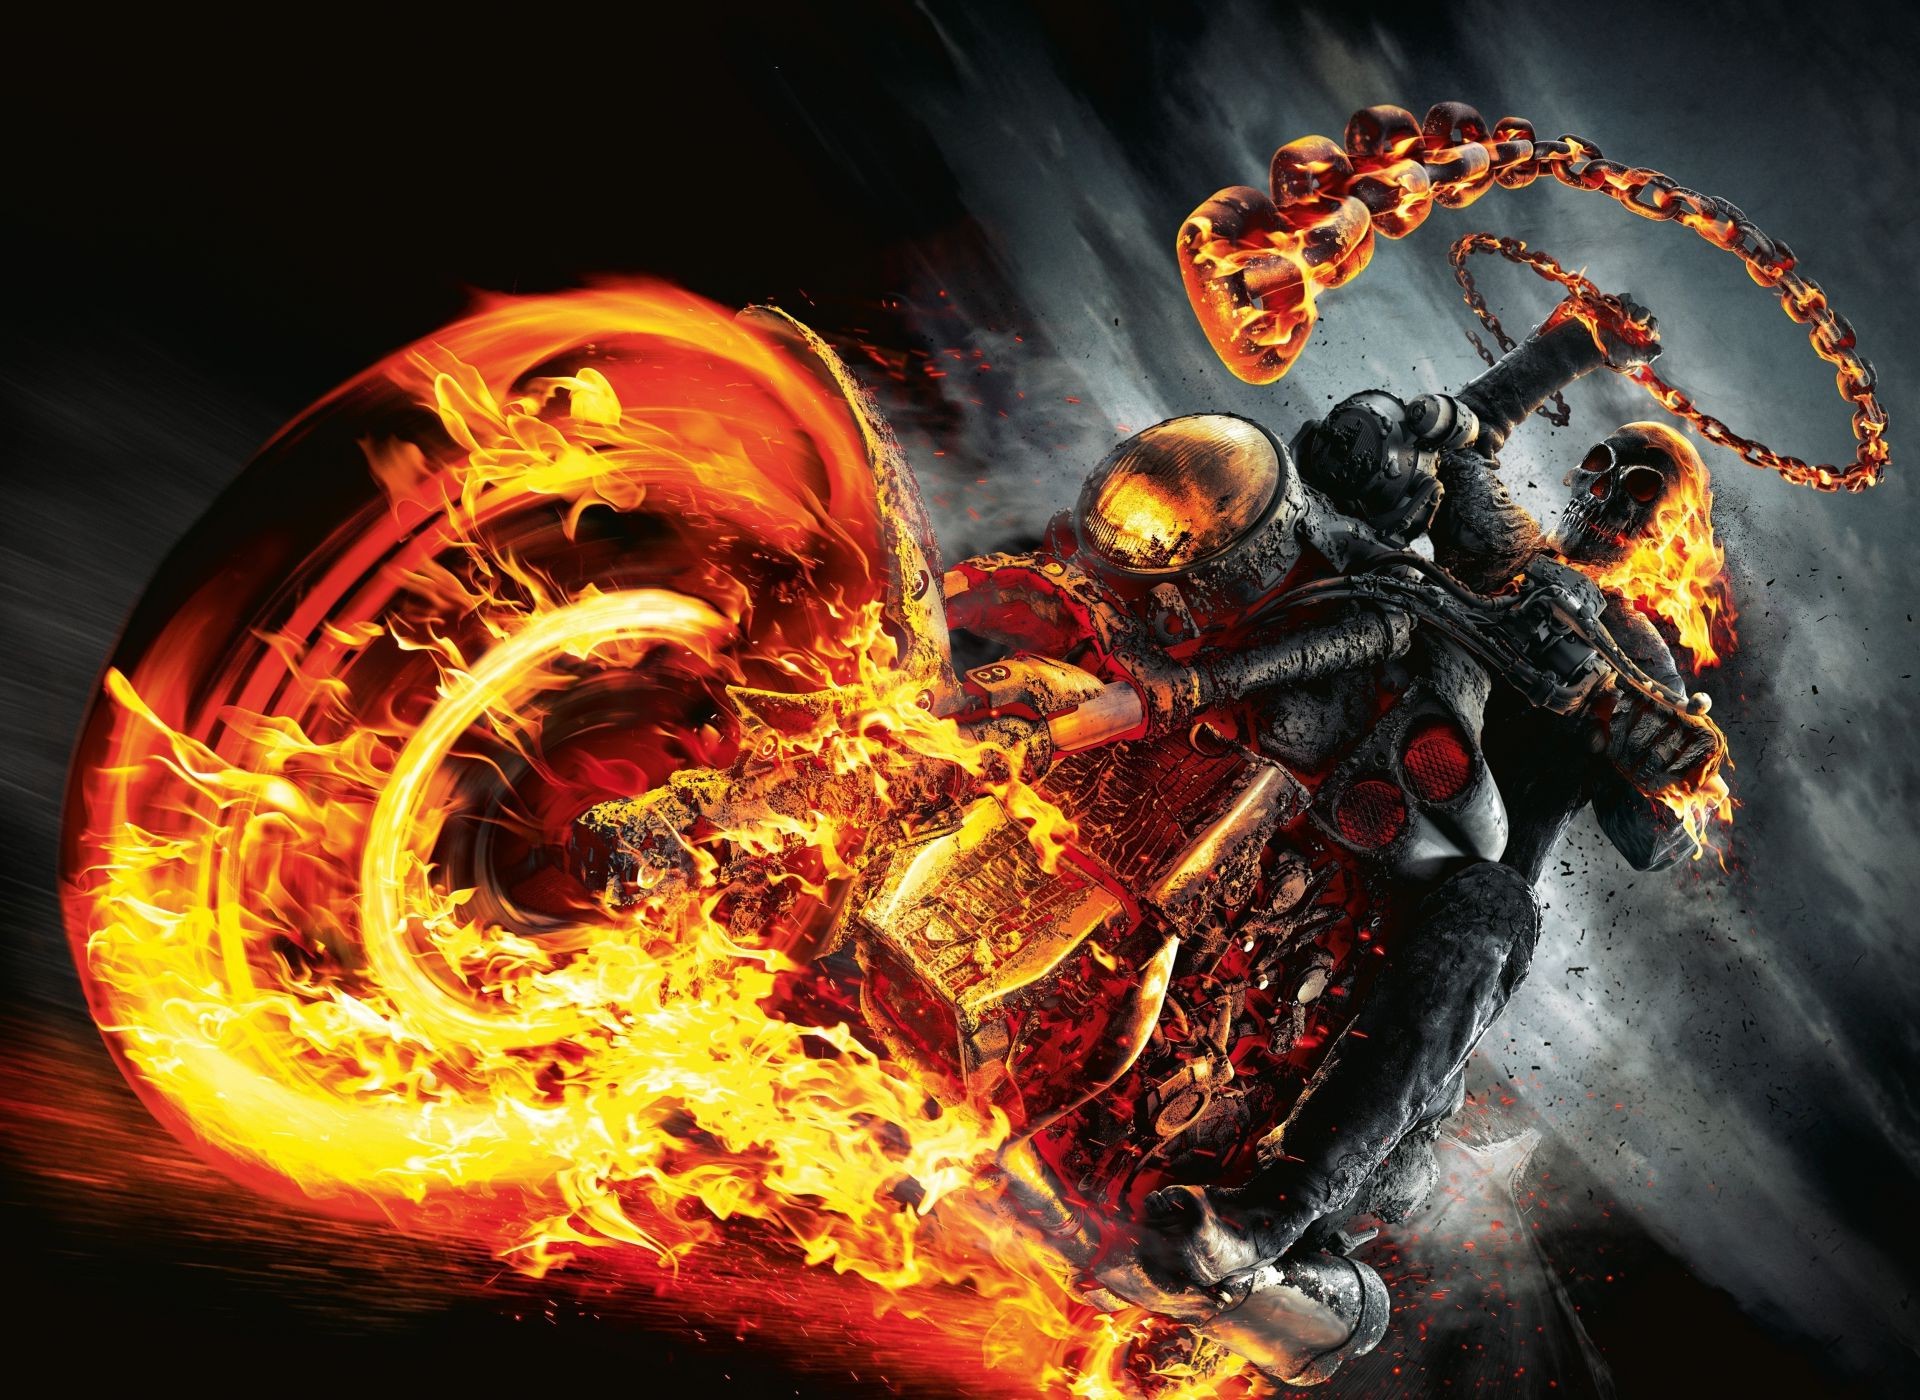 Ghost rider motorcycle fire skull Ghost rider - Phone wallpapers